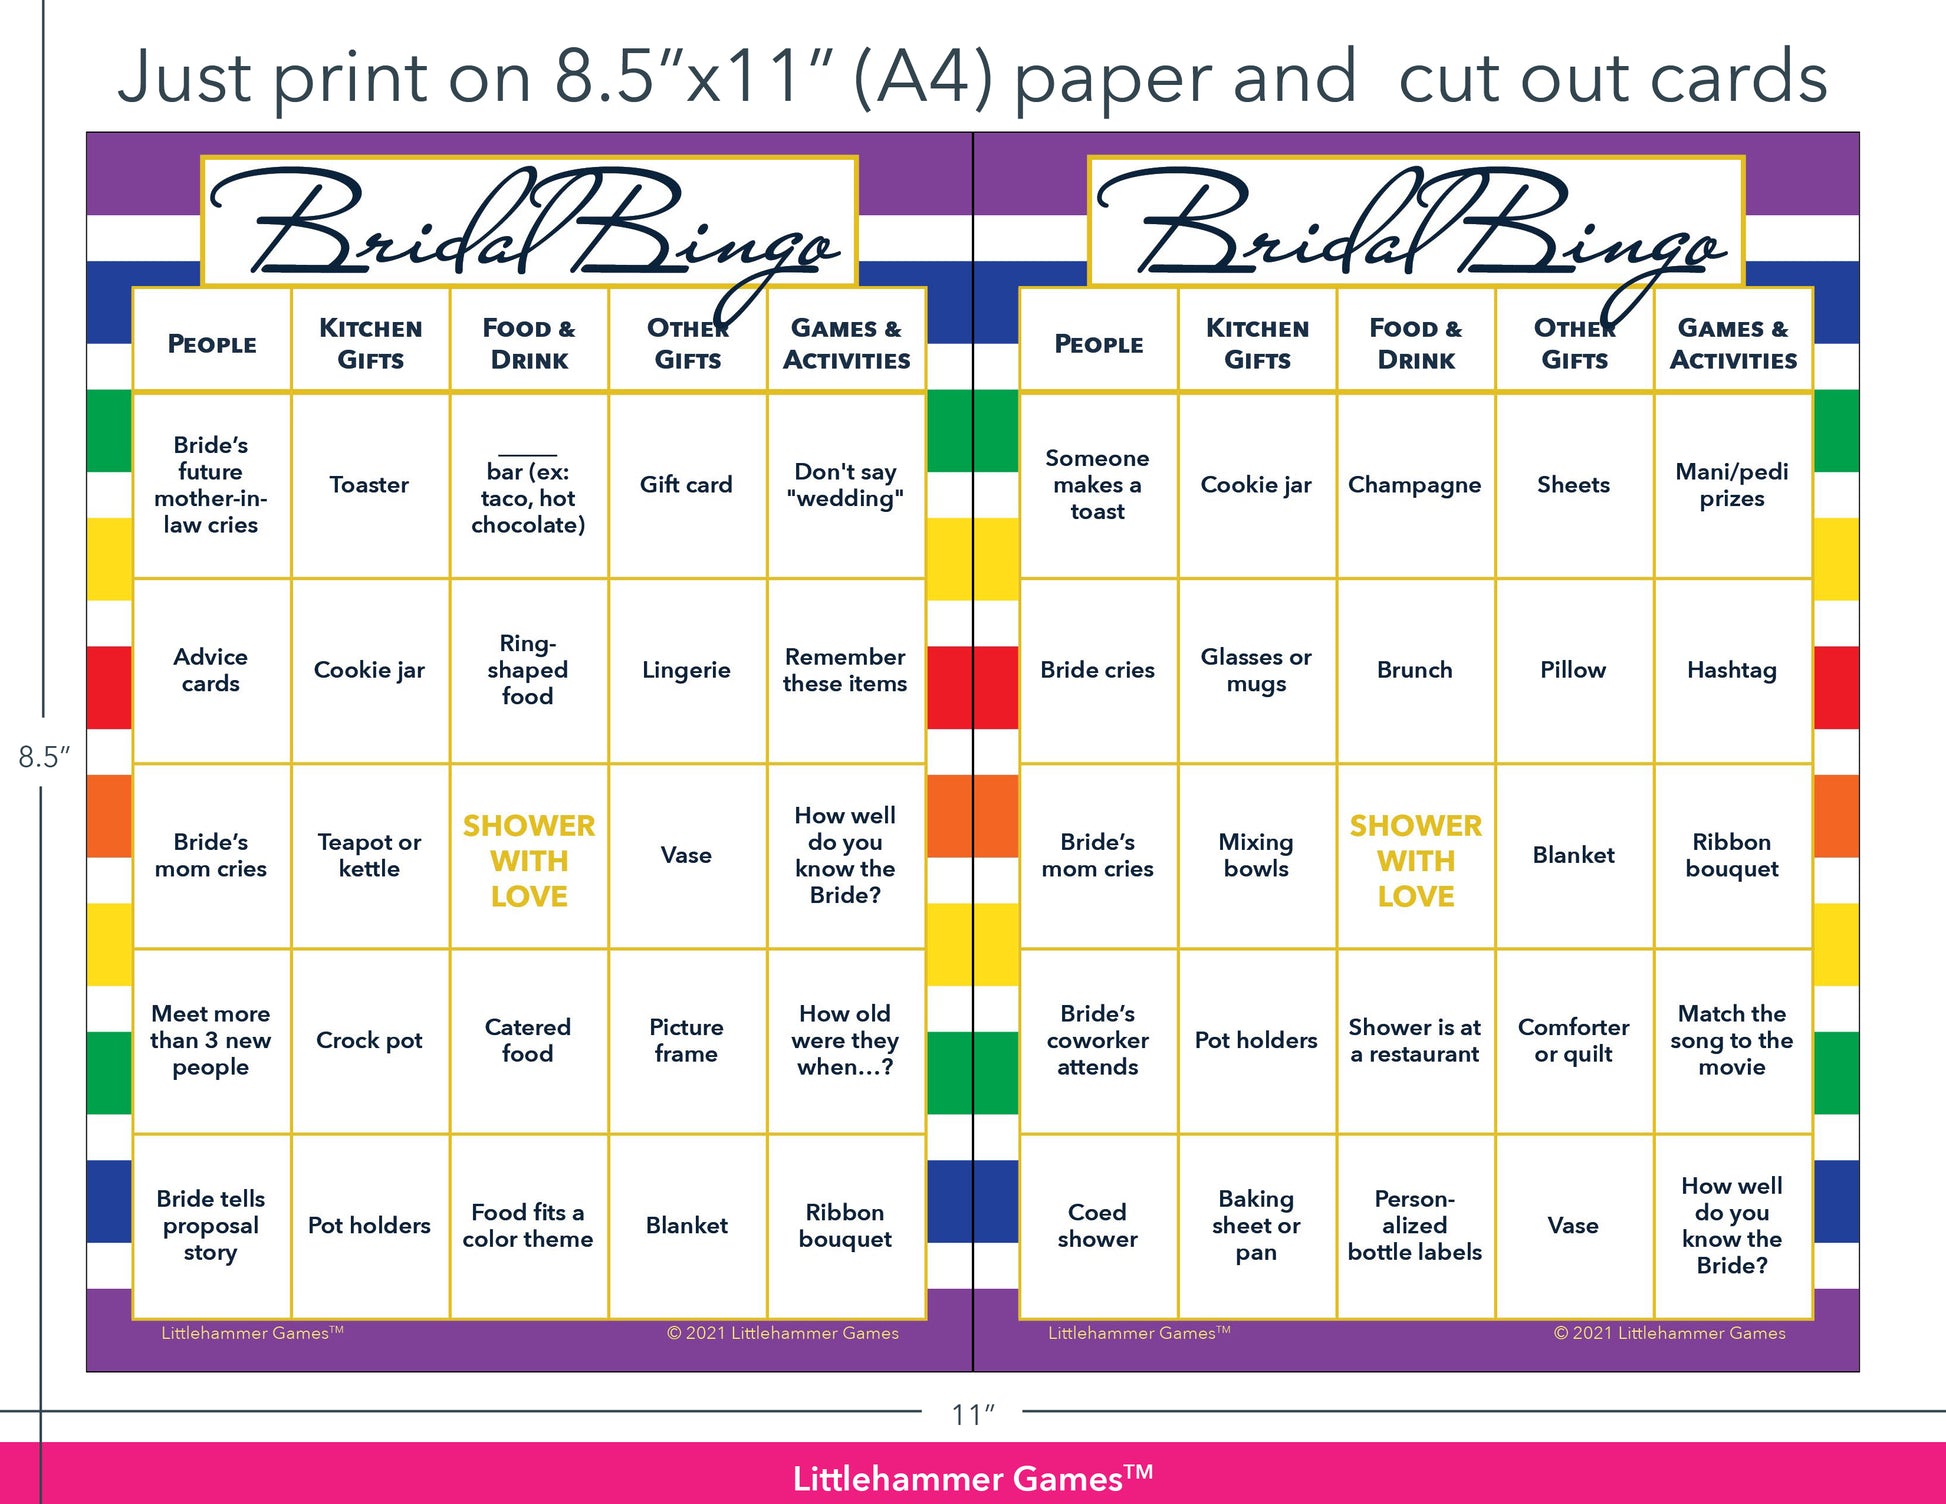 Rainbow-striped Bridal Bingo game cards with printing instructions